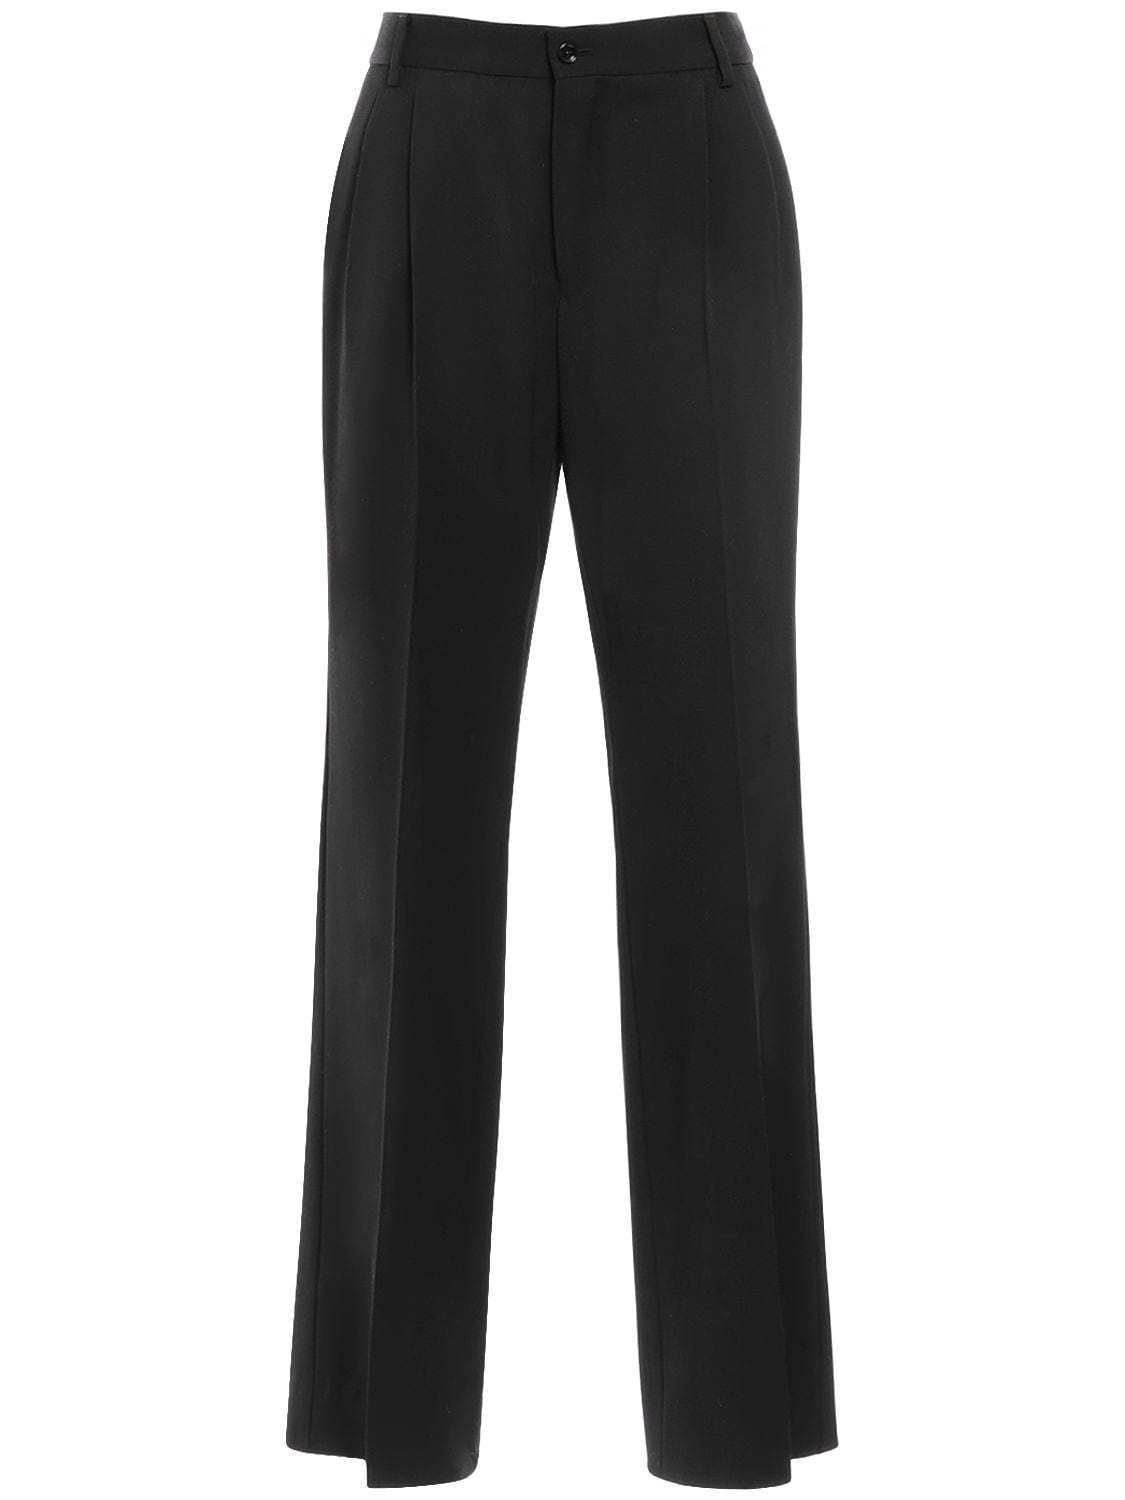 Image of Stretch Wool High Waist Flared Pants